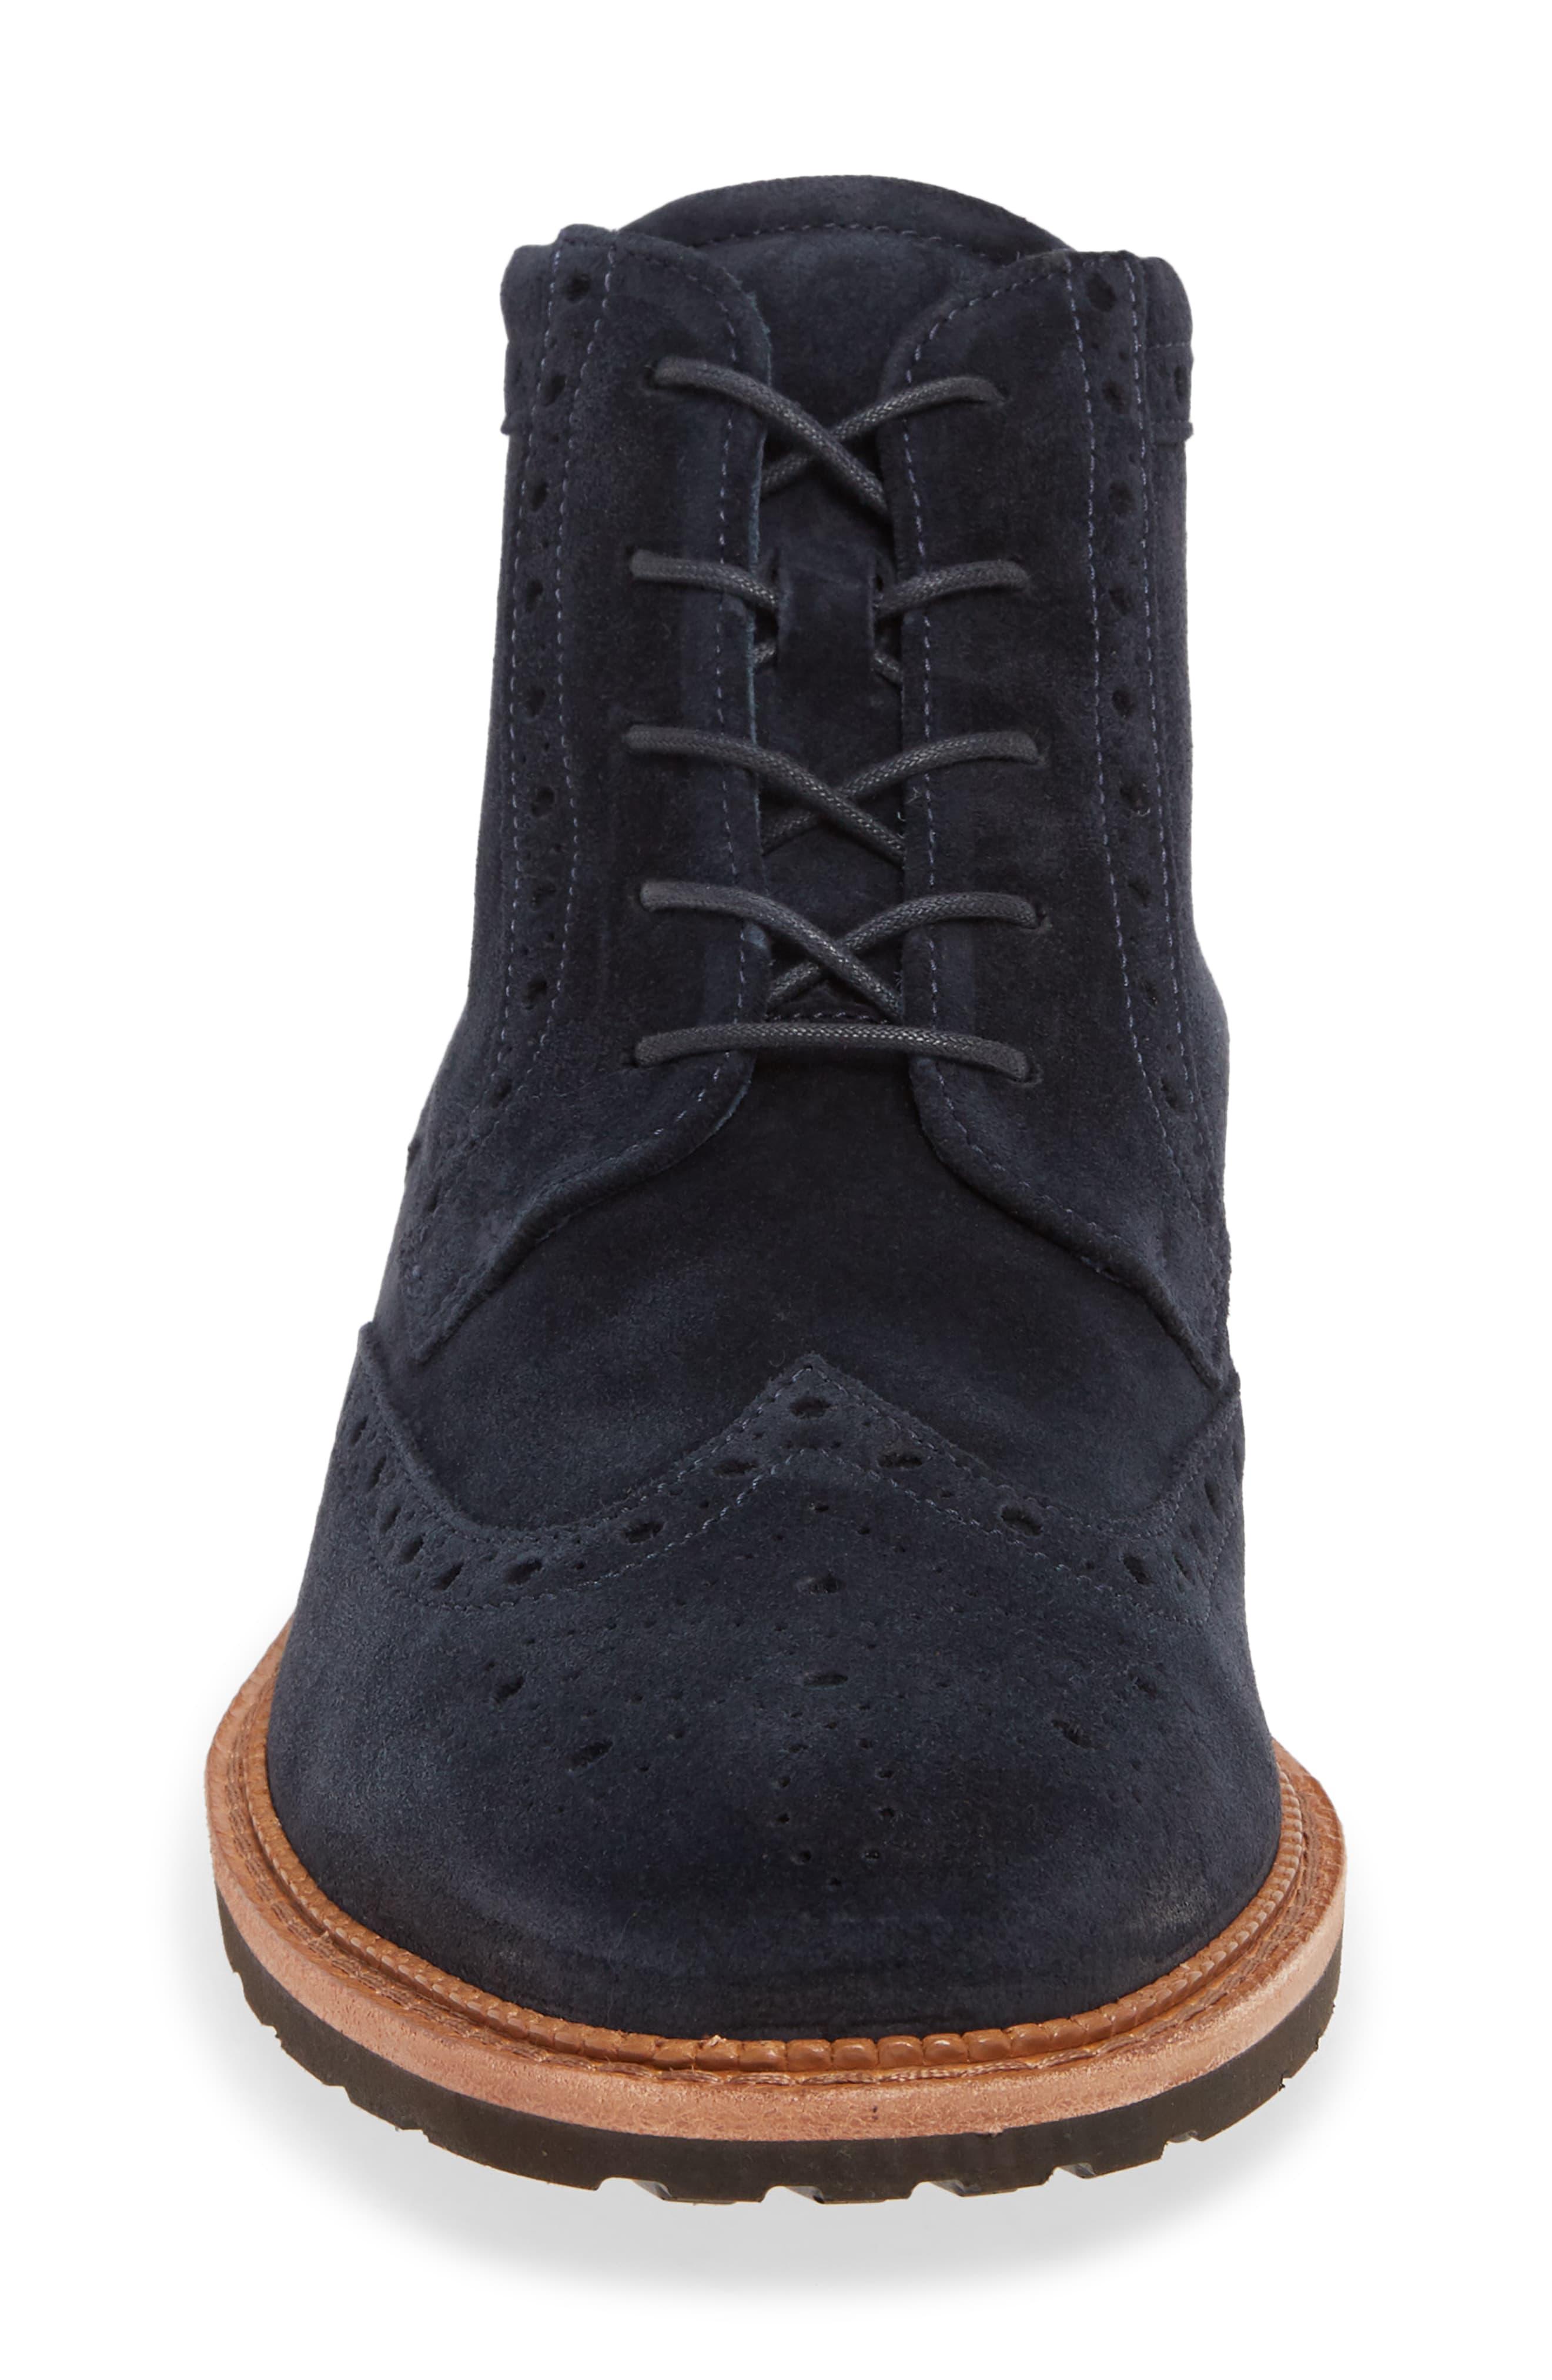 Ecco Leather Vitrus I Wingtip Boot in Navy (Blue) for Men - Lyst